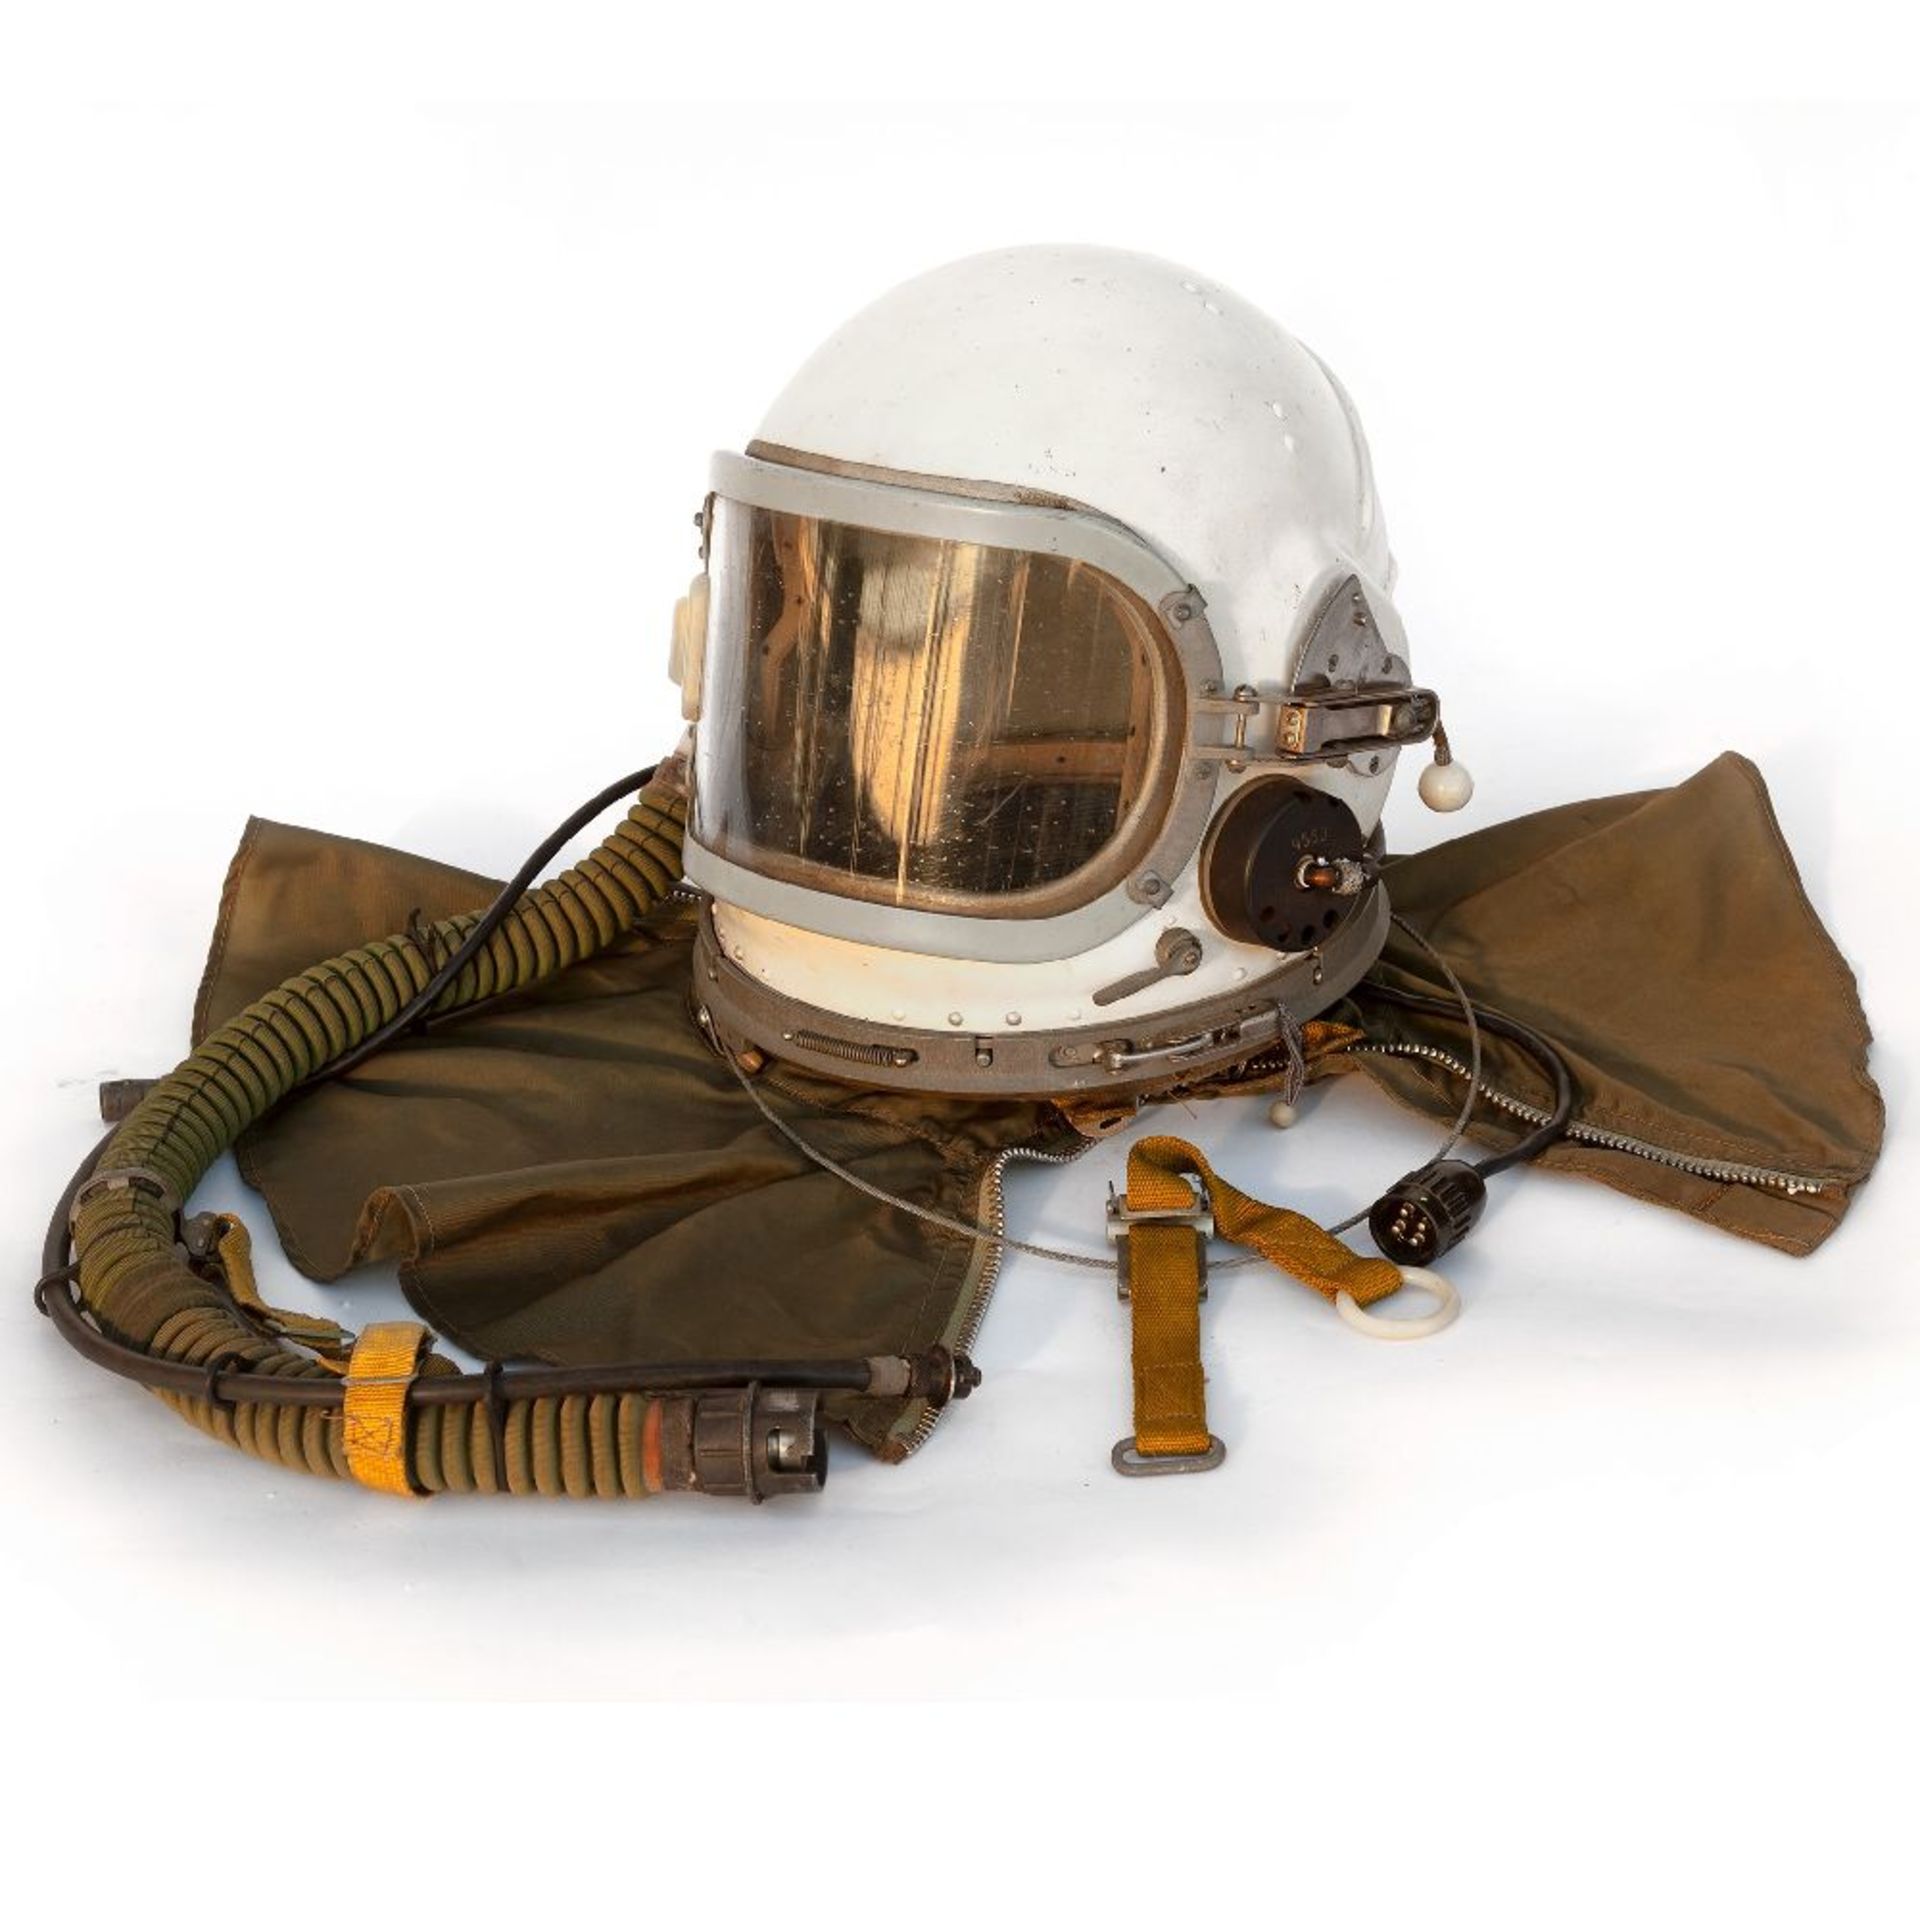 A COLD WAR SOVIET MIG 25 PILOT'S HELMET,c.1960-65, constructed for high altitude flight, also used - Image 3 of 5